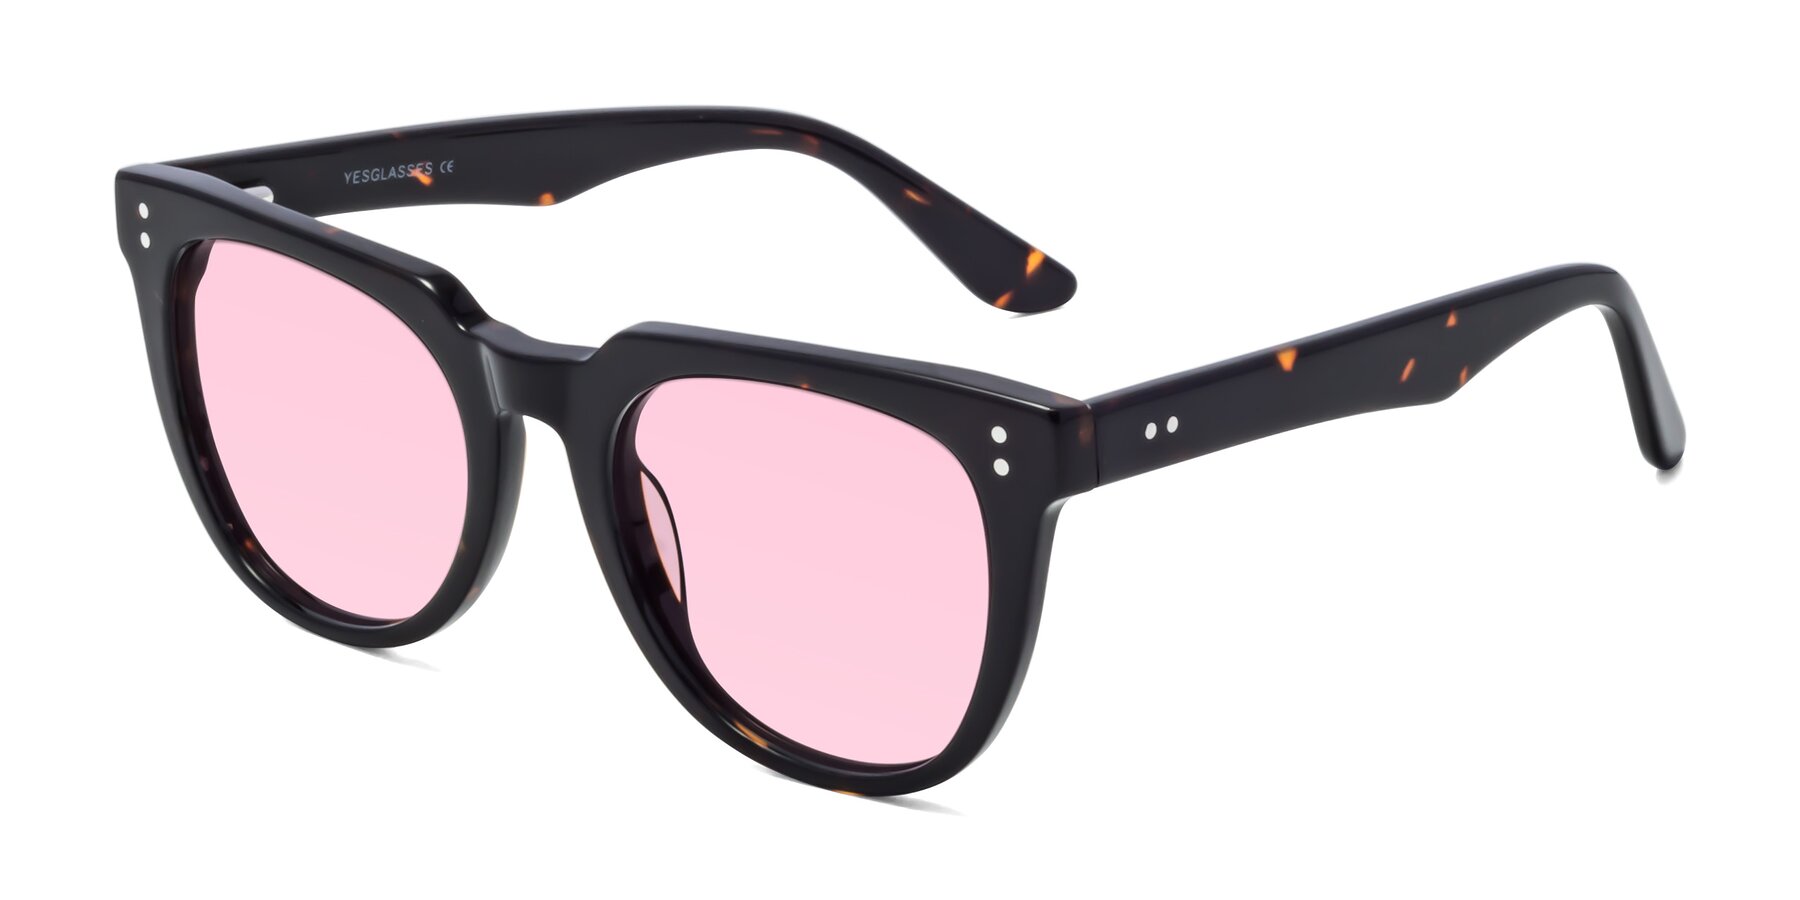 Angle of Graceful in Tortoise with Light Pink Tinted Lenses